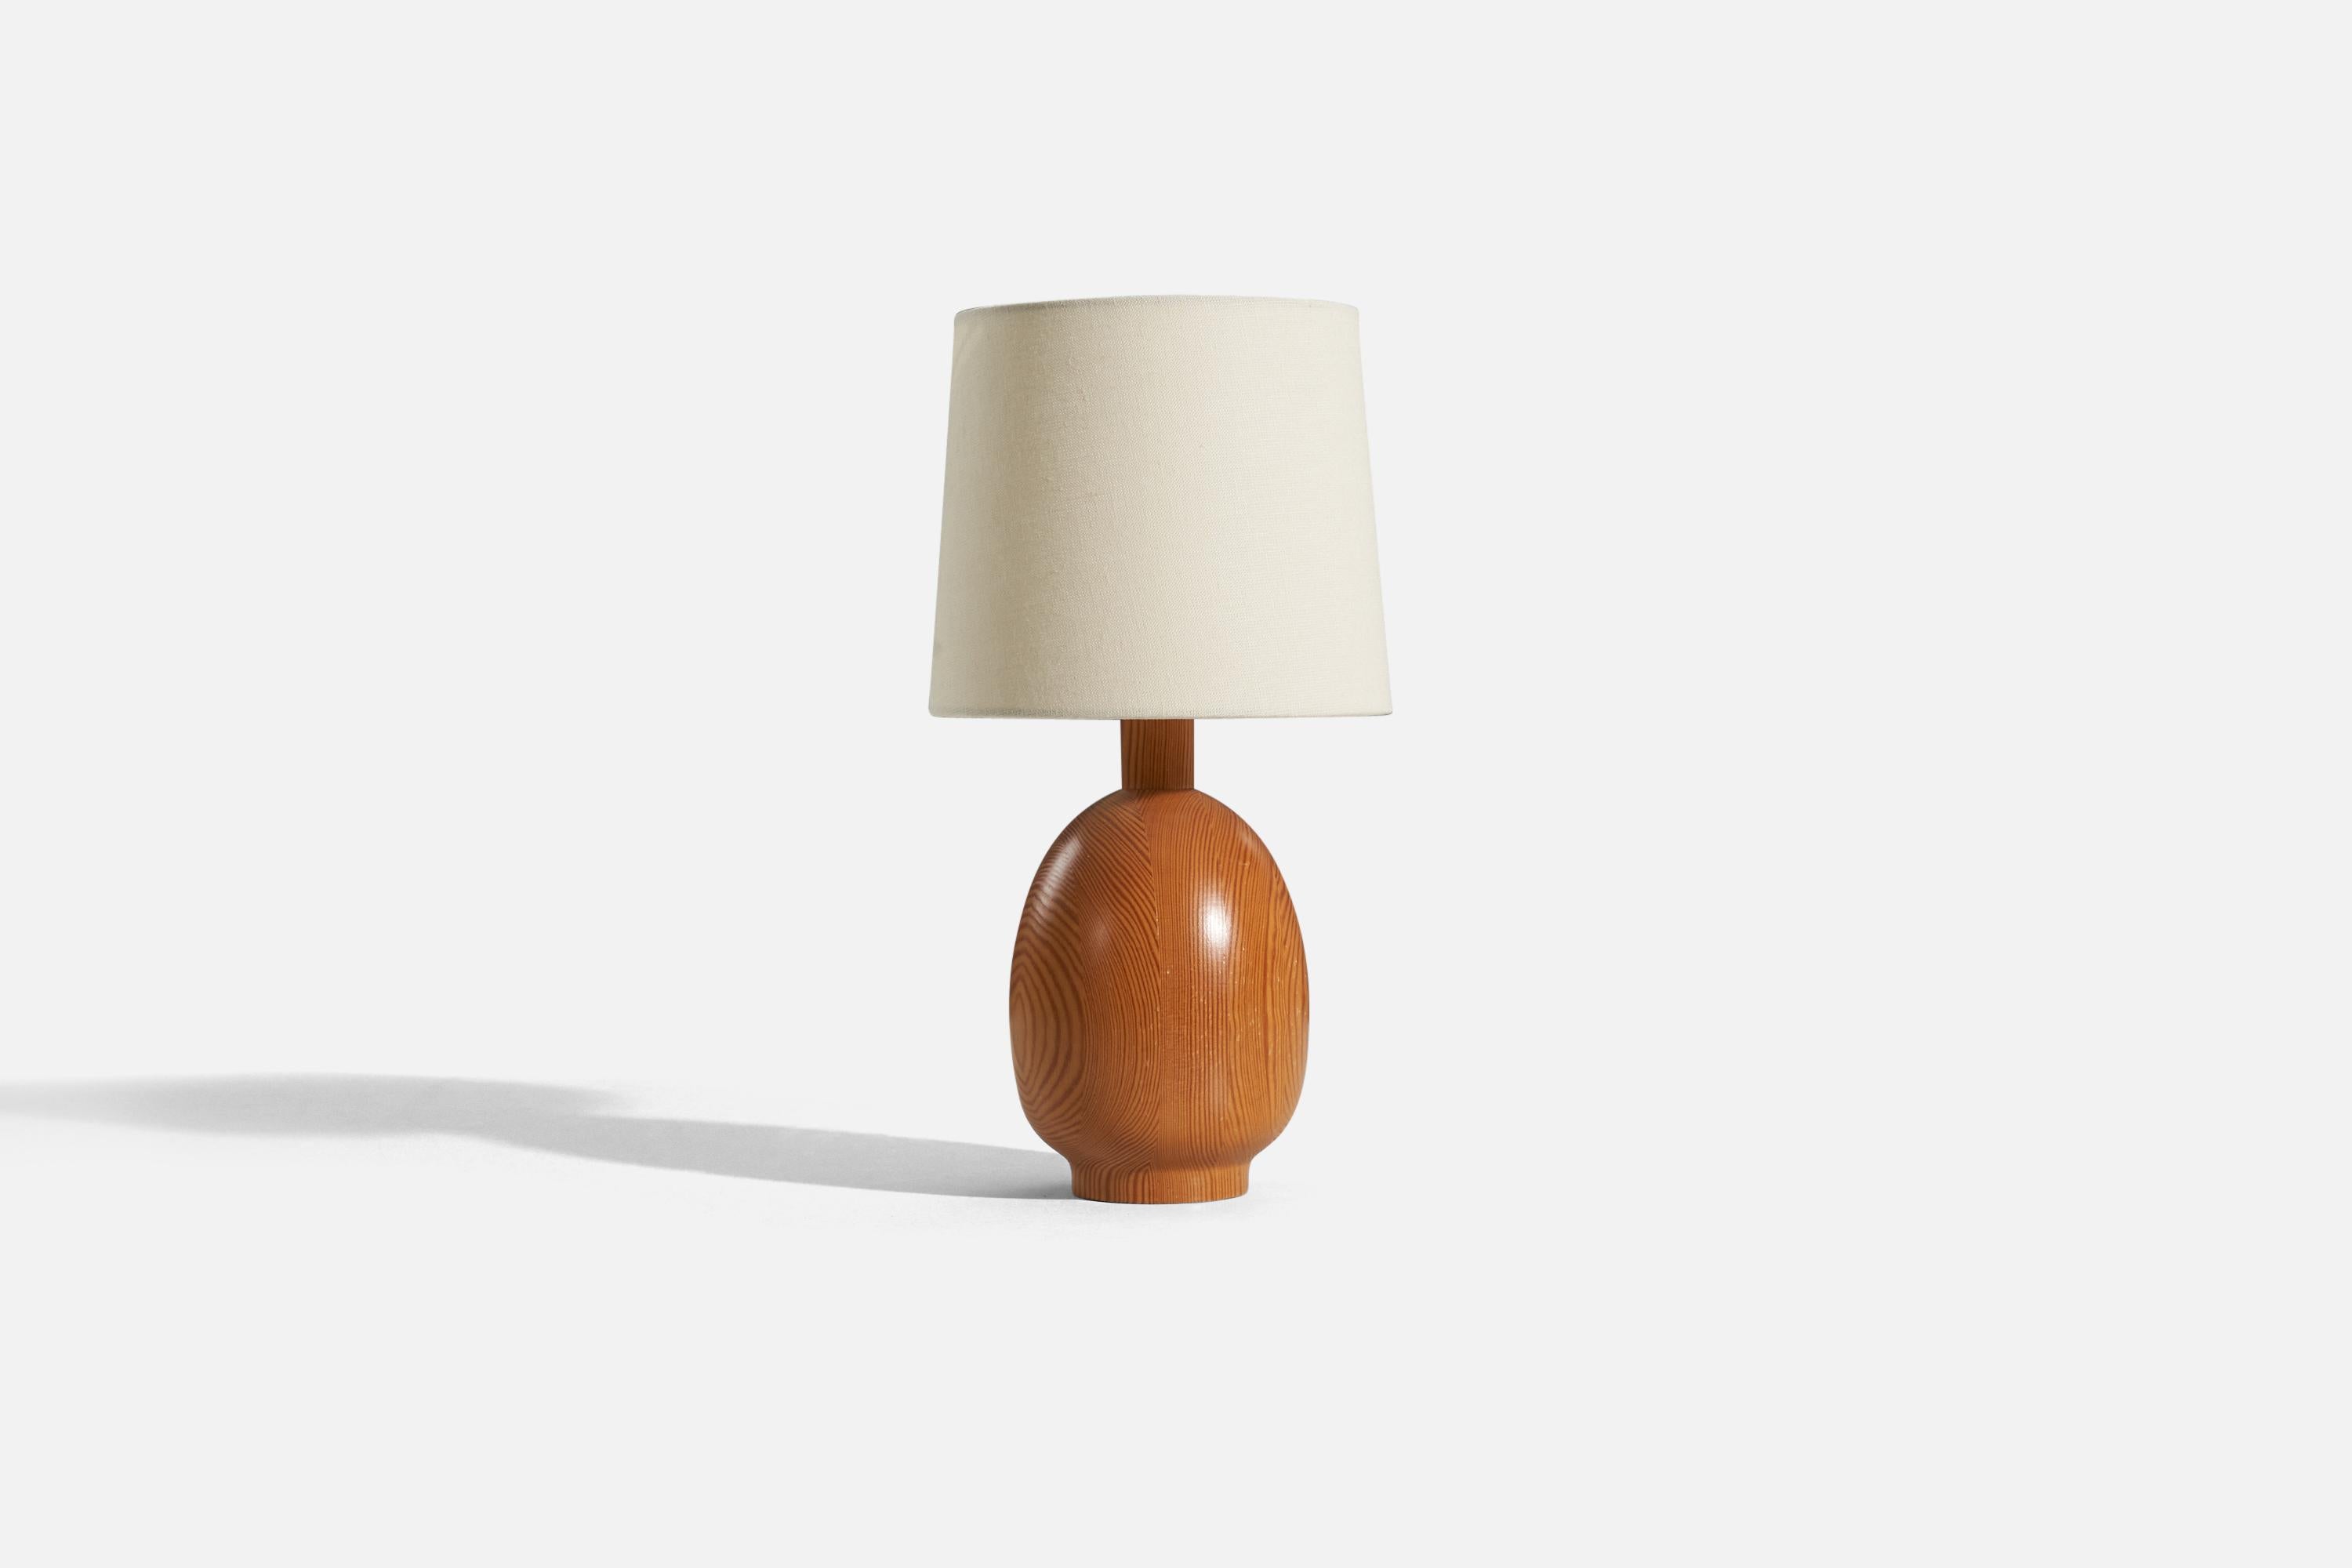 A solid pine table lamp designed and produced by Markslöjd, Kinna, Sweden, c. 1970s.

Sold without lampshade. 
Dimensions of Lamp (inches) : 11.3125 x 5 x 5 (H x W x D)
Dimensions of Shade (inches) : 7 x 8 x 7 (T x B x H)
Dimension of Lamp with